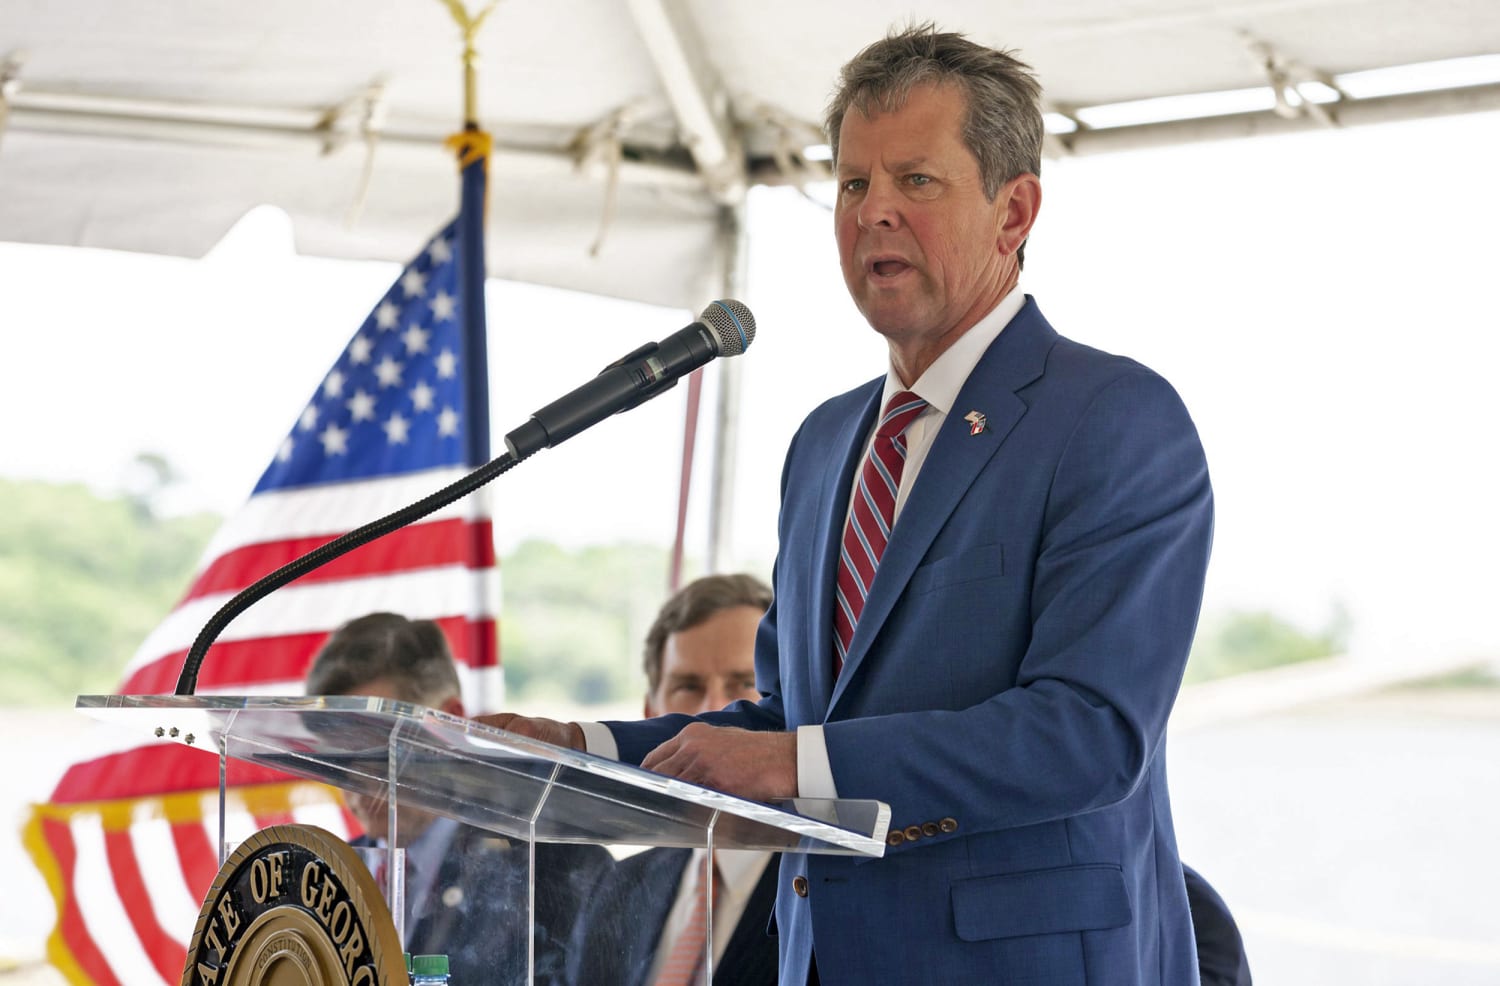 Does Georgia Gov. Kemp want to ban Plan B, contraception?